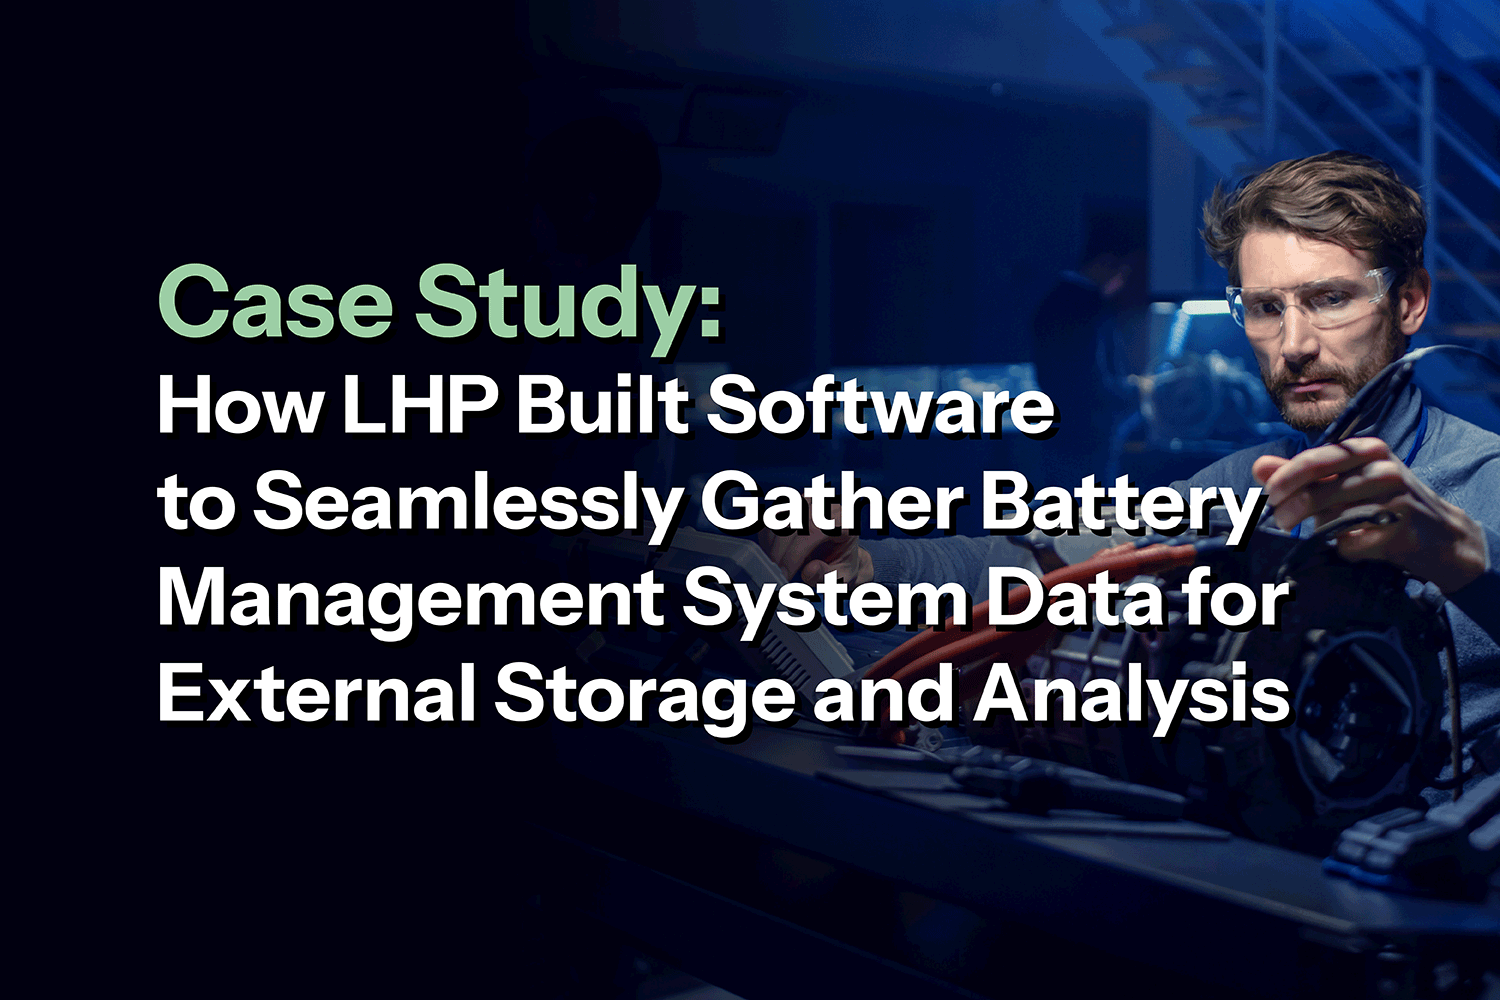 LSS-Knowledge-Center-Case-Study-How LHP Built Software(...)-Card-Images-01